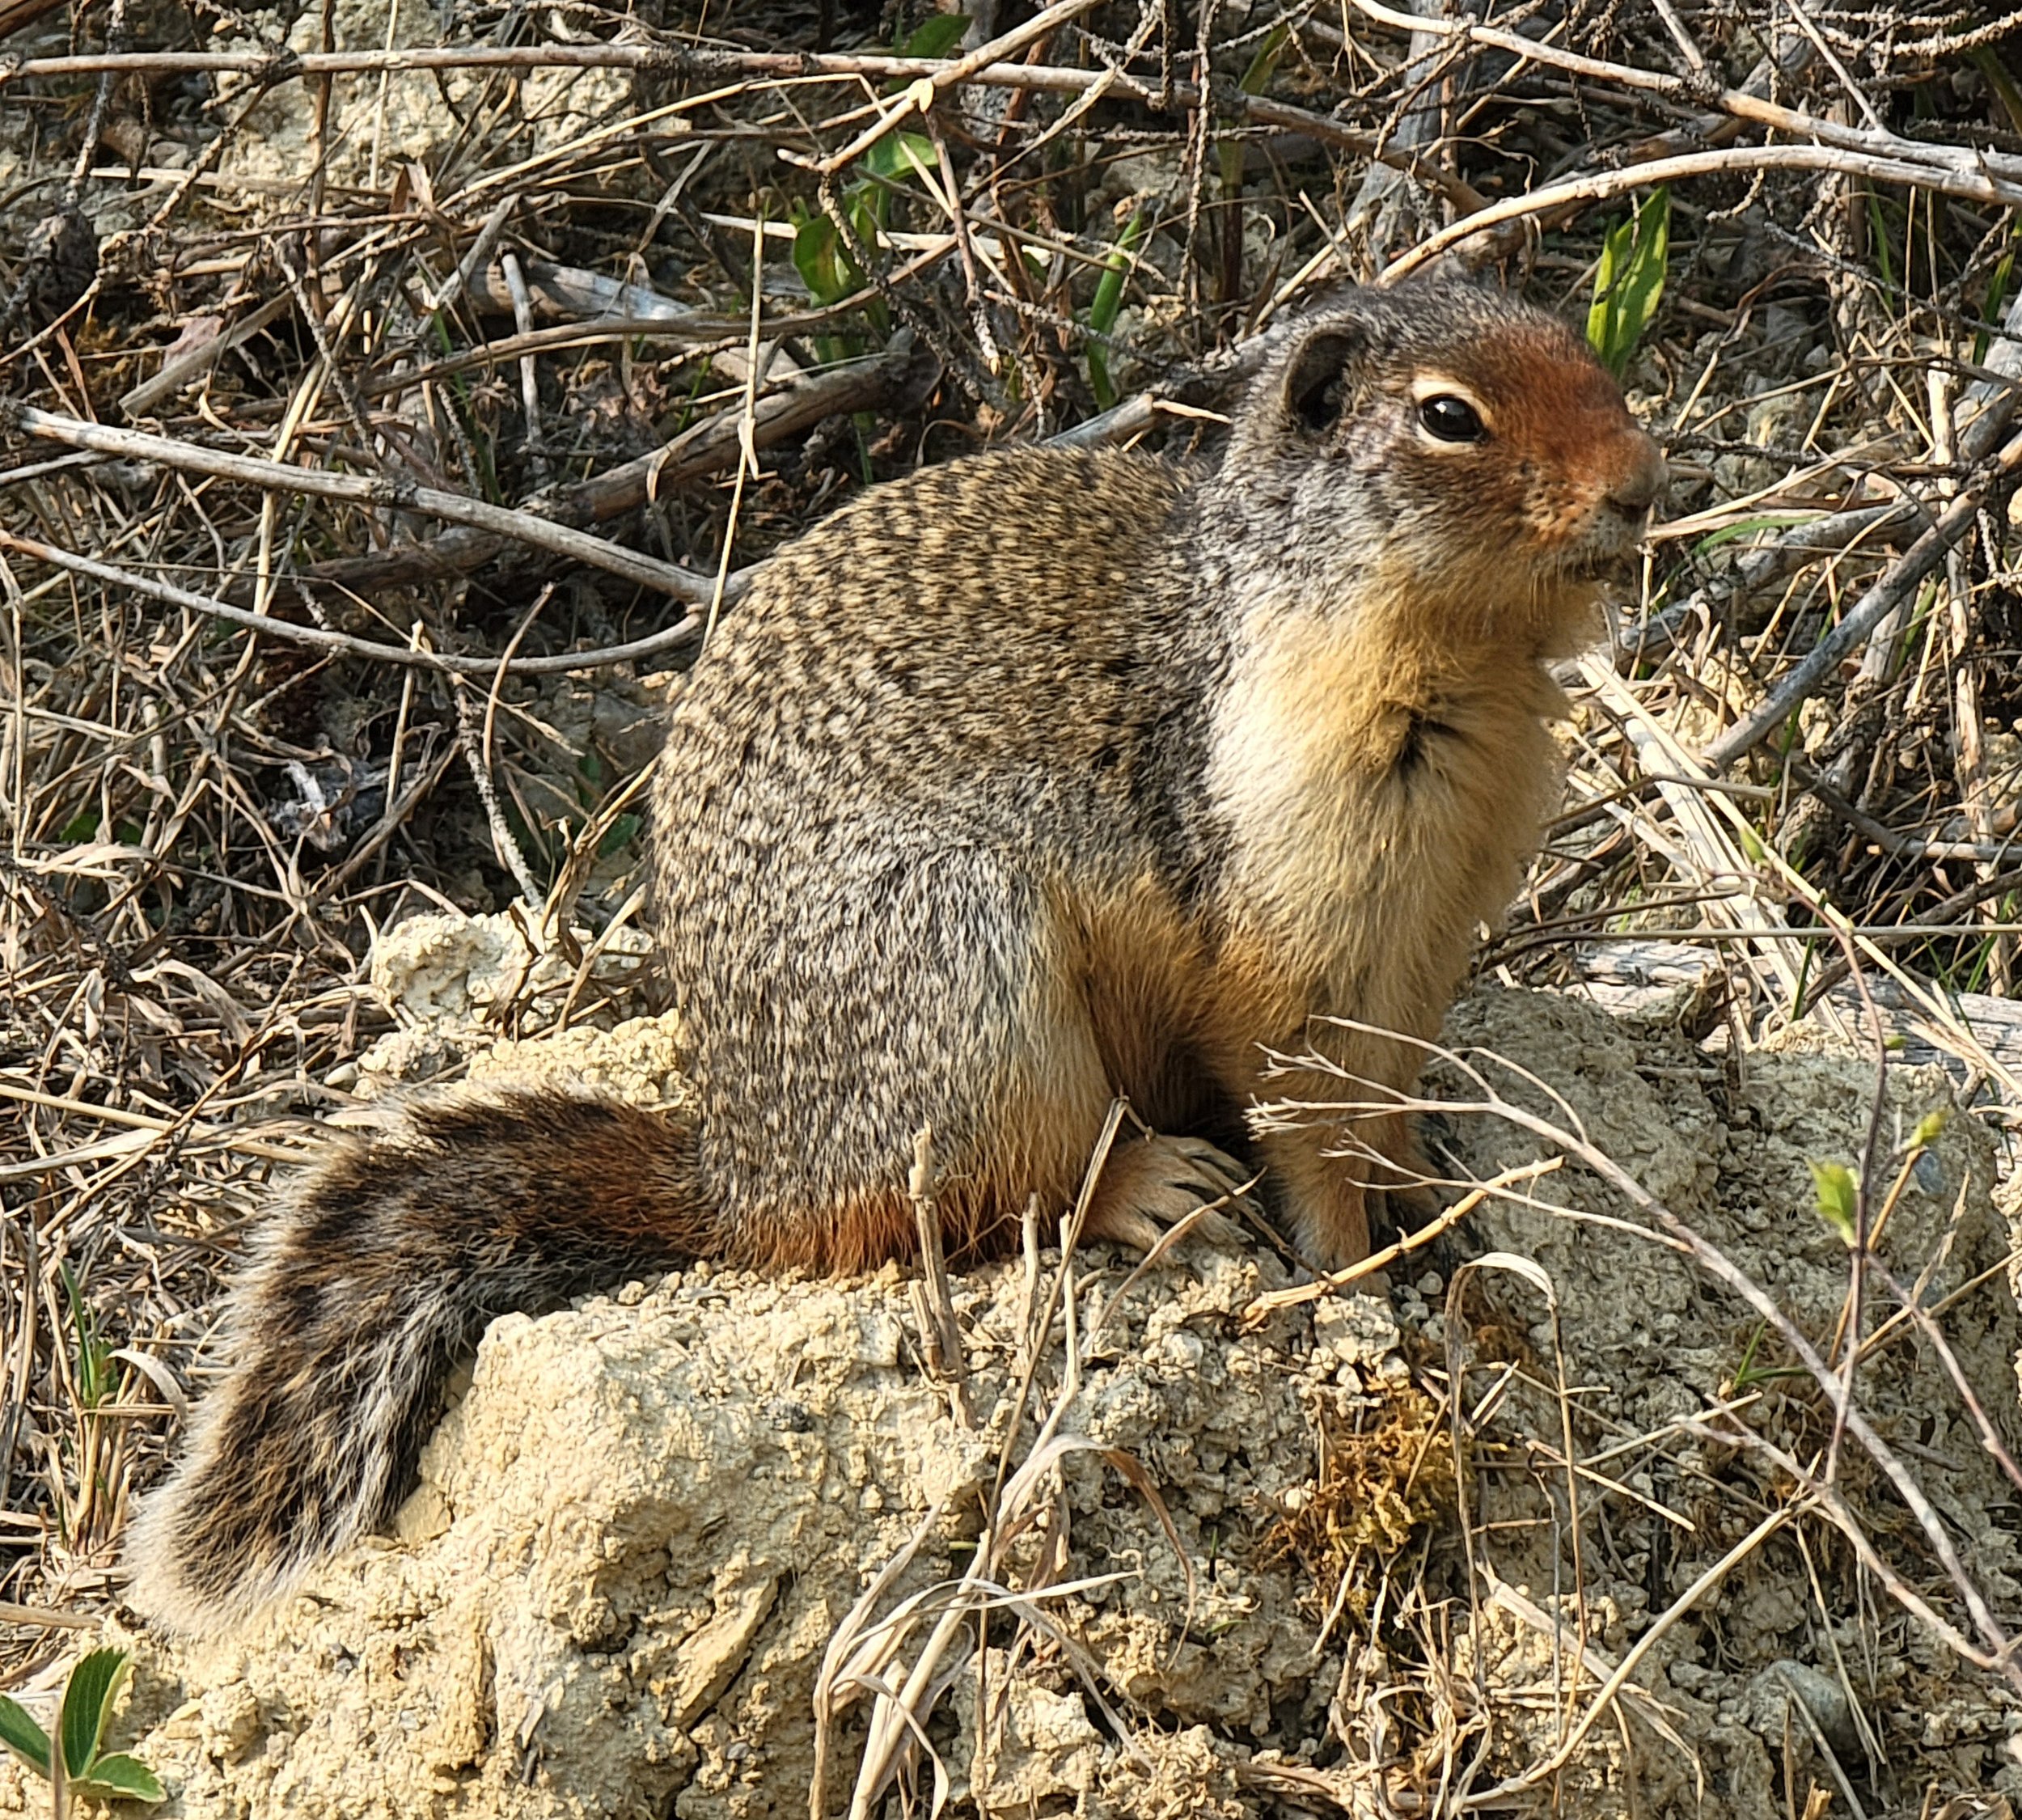 My phone app tells me this is a Columbian Ground Squirrel. I've named him Peanuts.